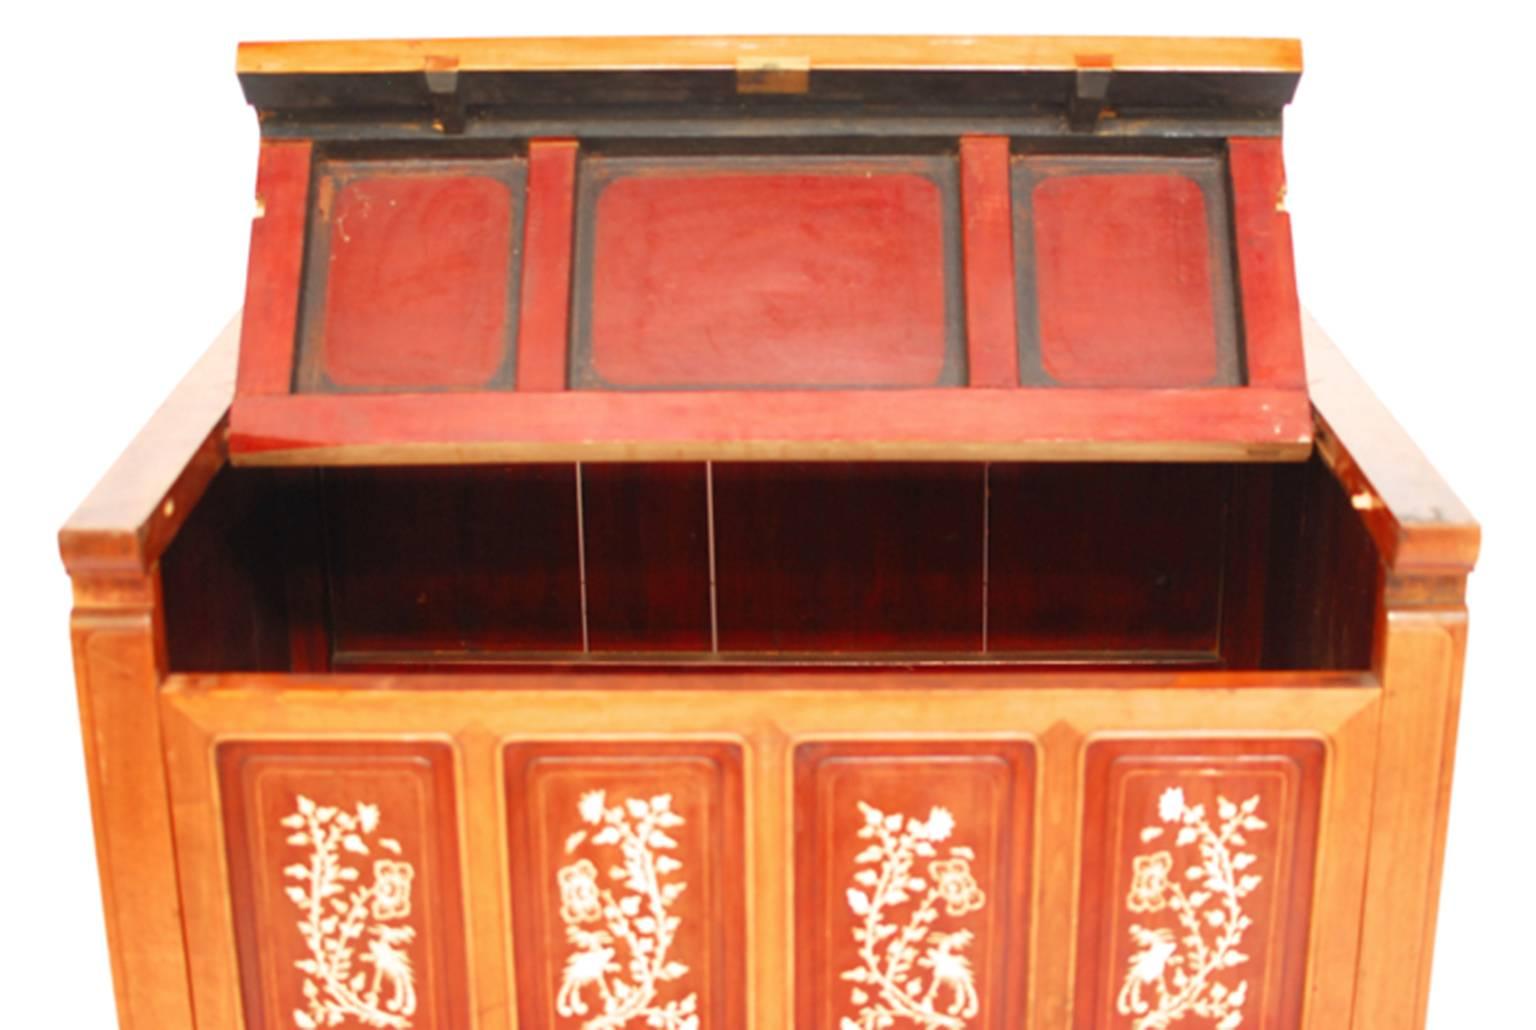 Antique Chinese storage chest from early 19th century Shanghai China. Opens with a slide on lid and has removable front panels. Eight inset panels on front. Bone inlaid with phoenix and peonies. Lots of minor losses to original finish but overall